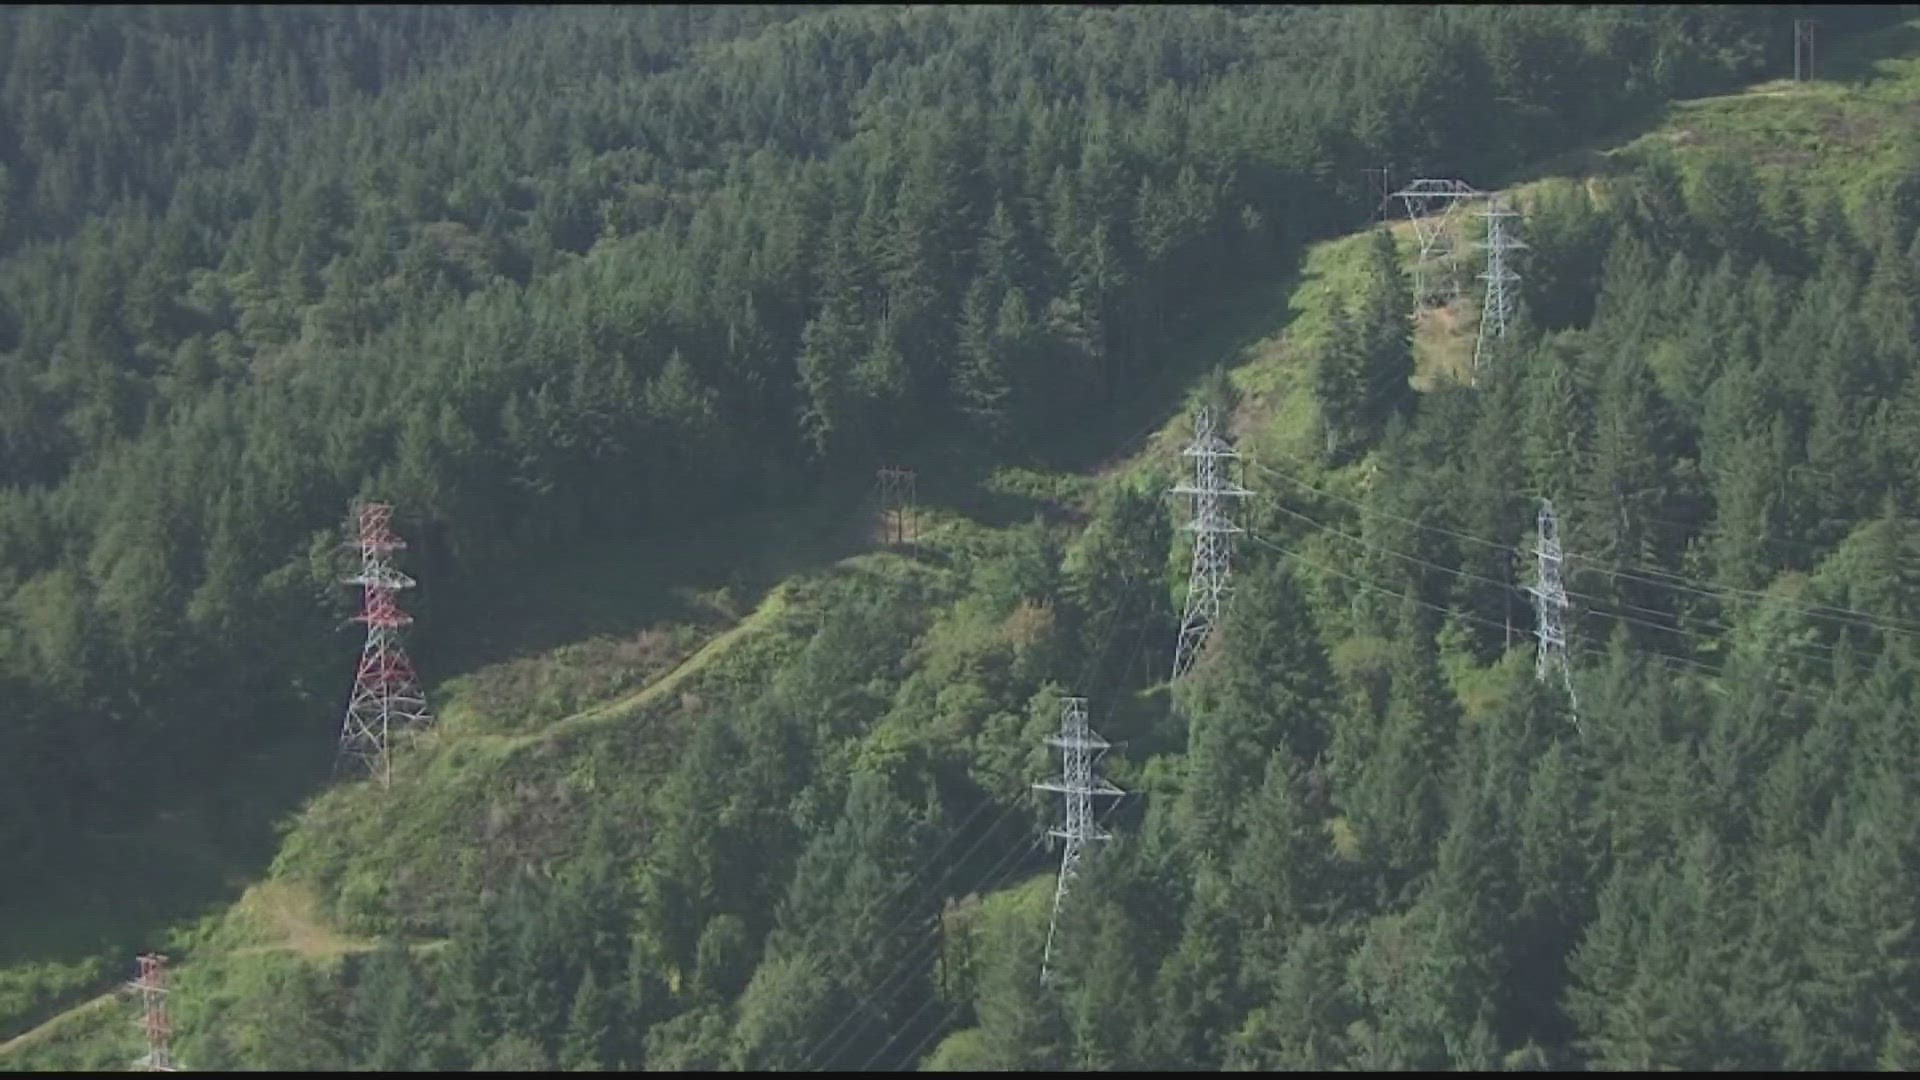 Some hikers at the park said they're concerned about the project's impact on the park's trails.